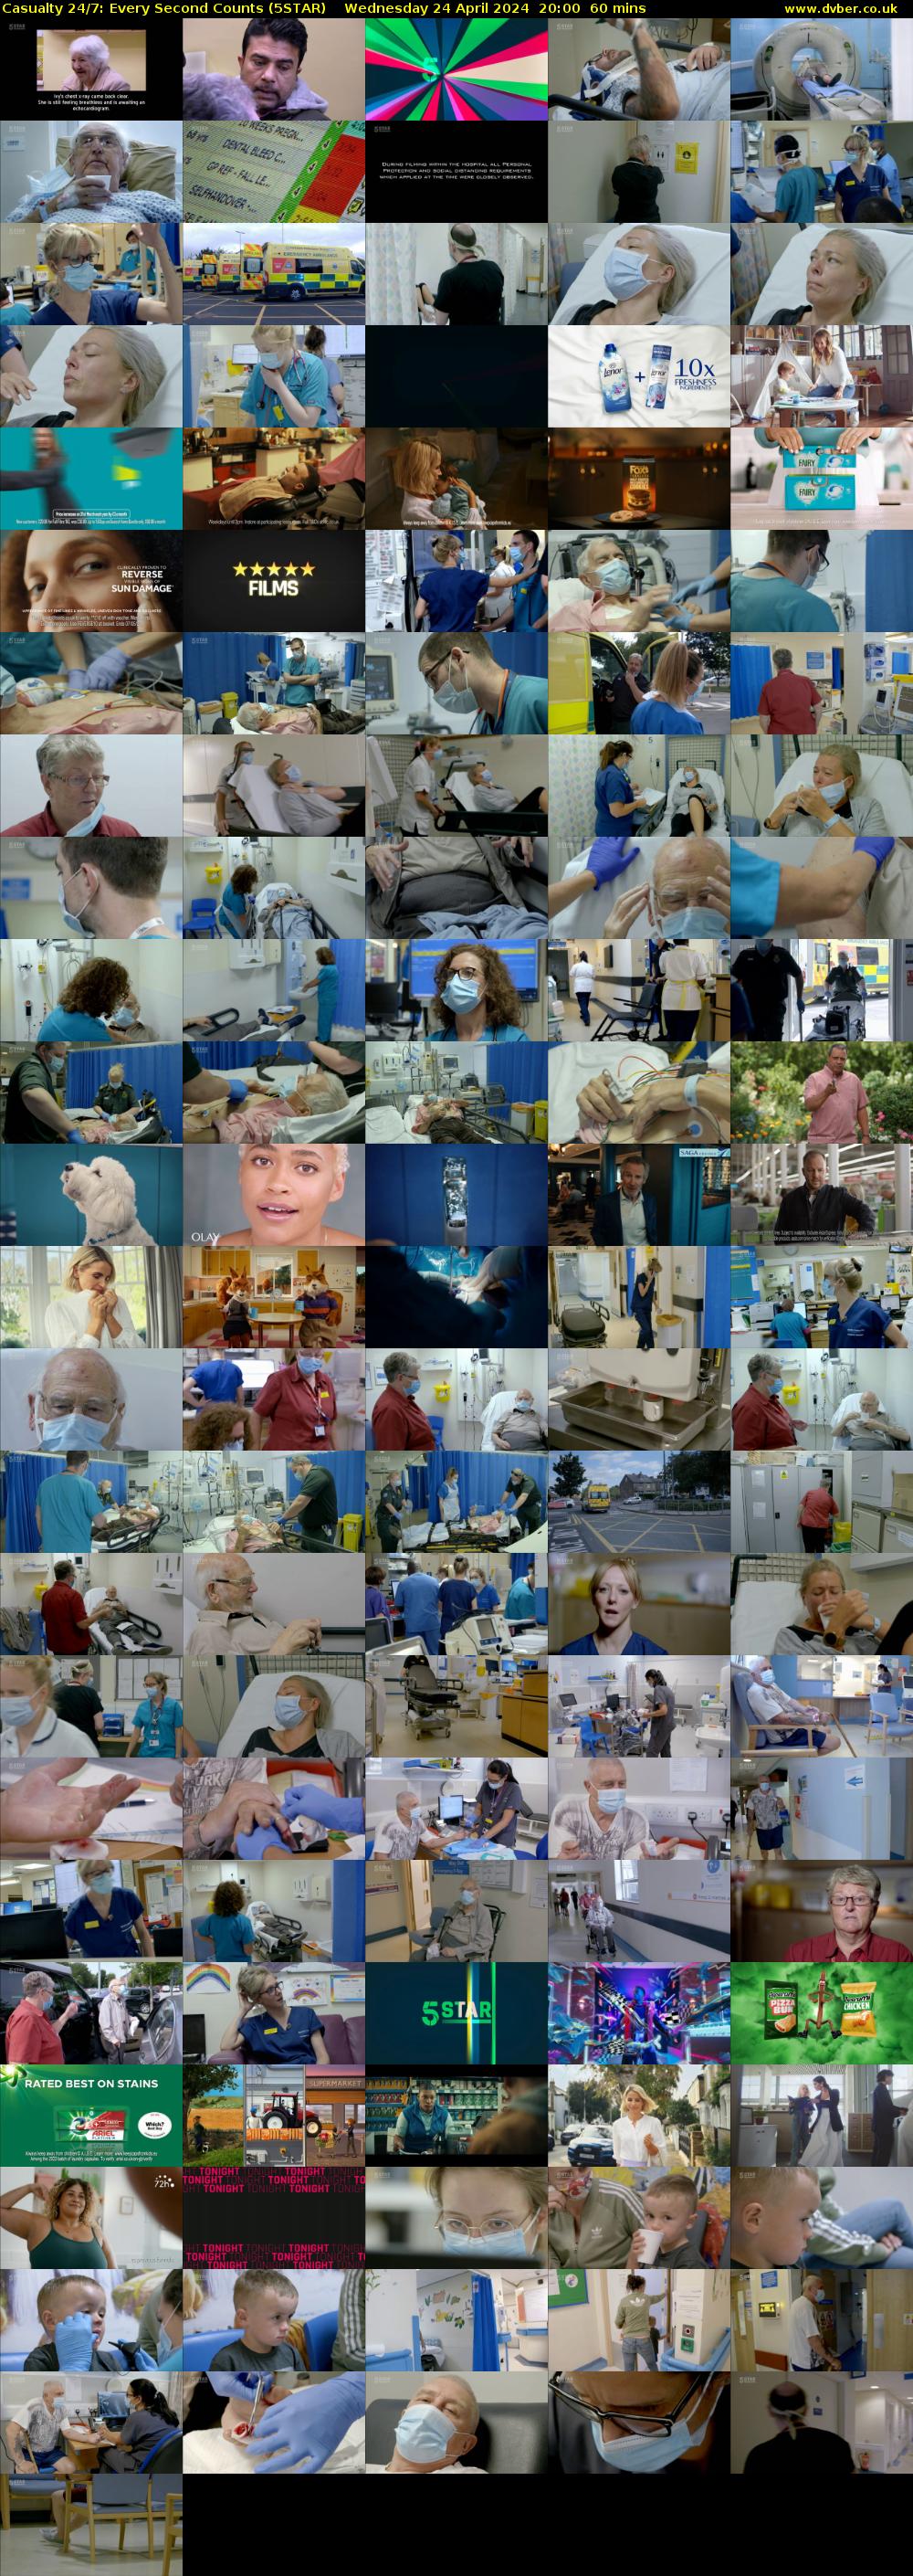 Casualty 24/7: Every Second Counts (5STAR) Wednesday 24 April 2024 20:00 - 21:00